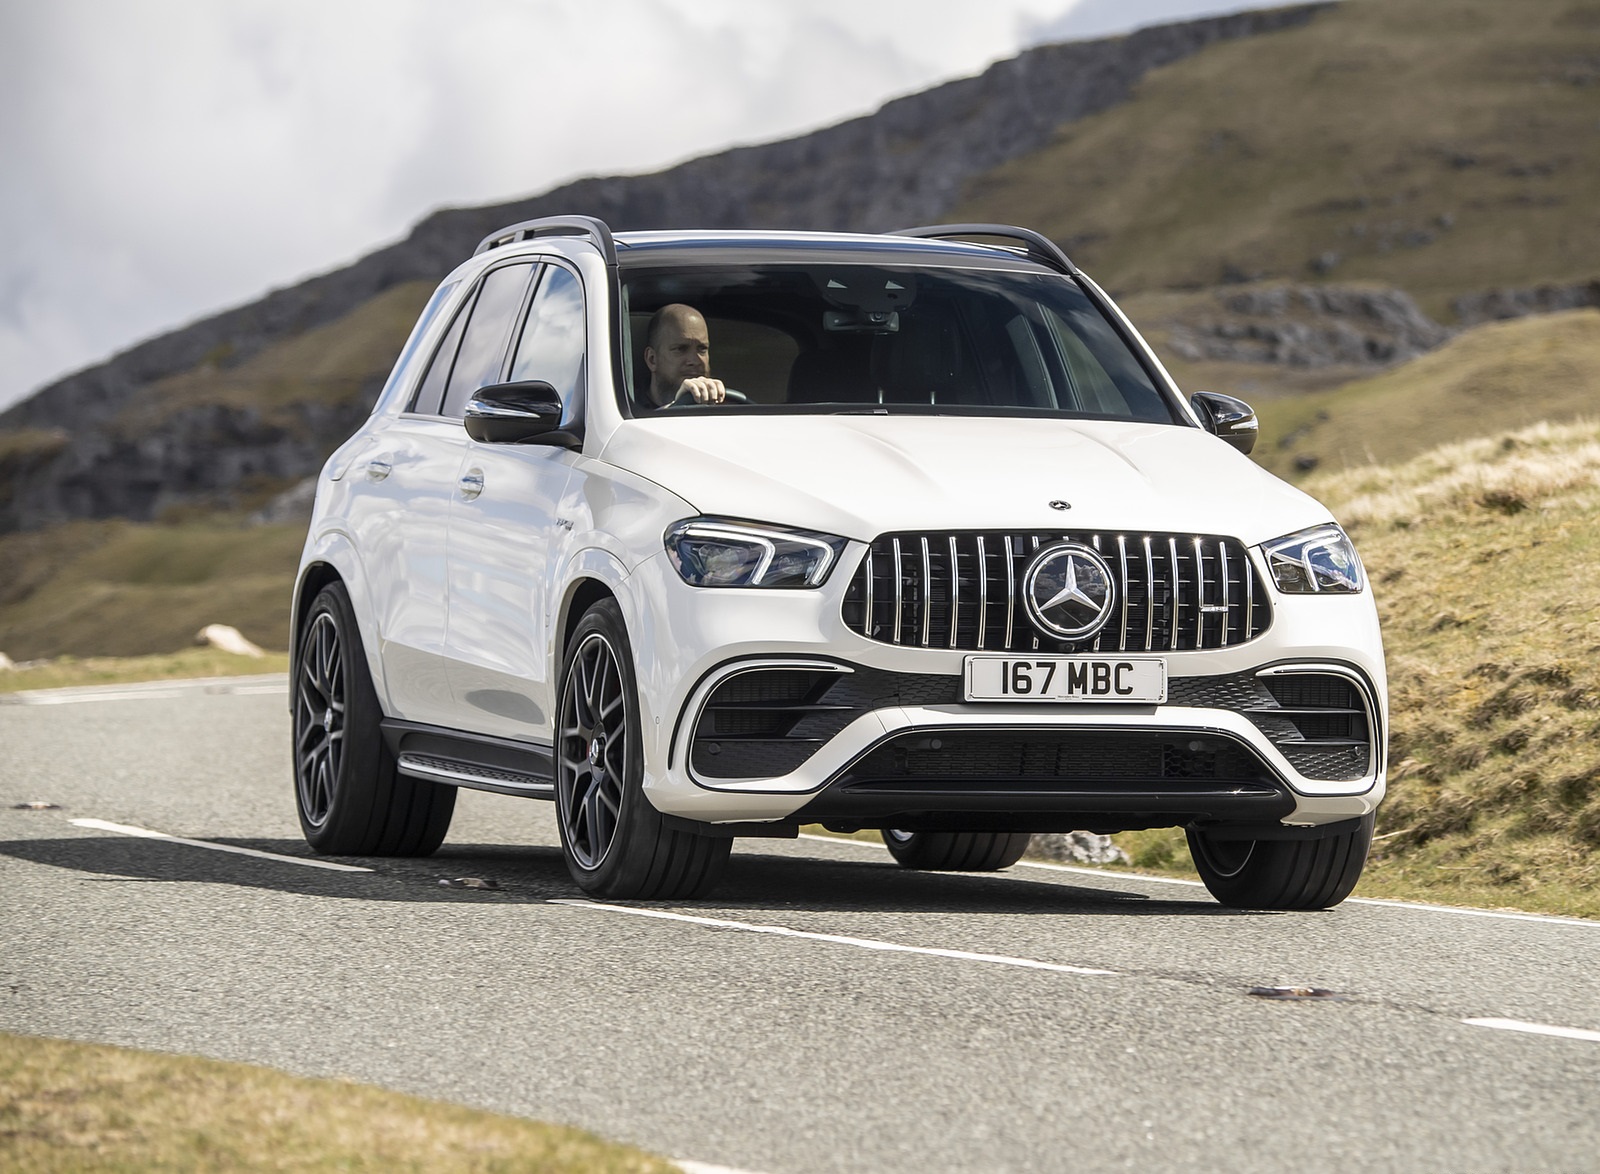 2021 Mercedes-AMG GLE 63 S 4MATIC (UK-Spec) Front Three-Quarter Wallpapers (1)